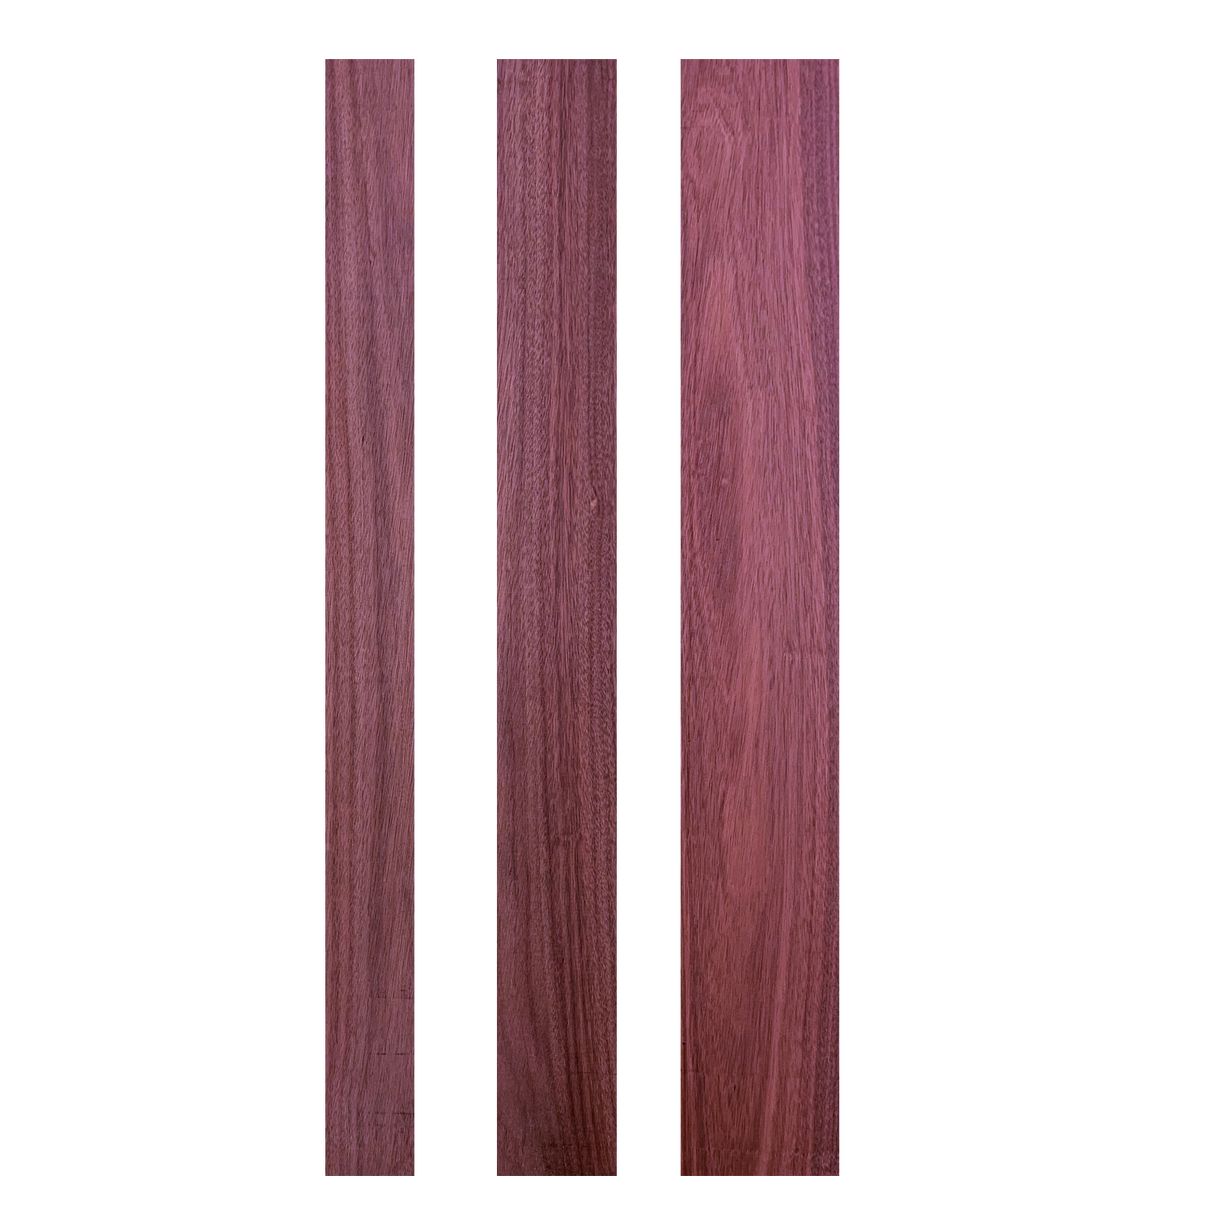 Bloodwood - Thins